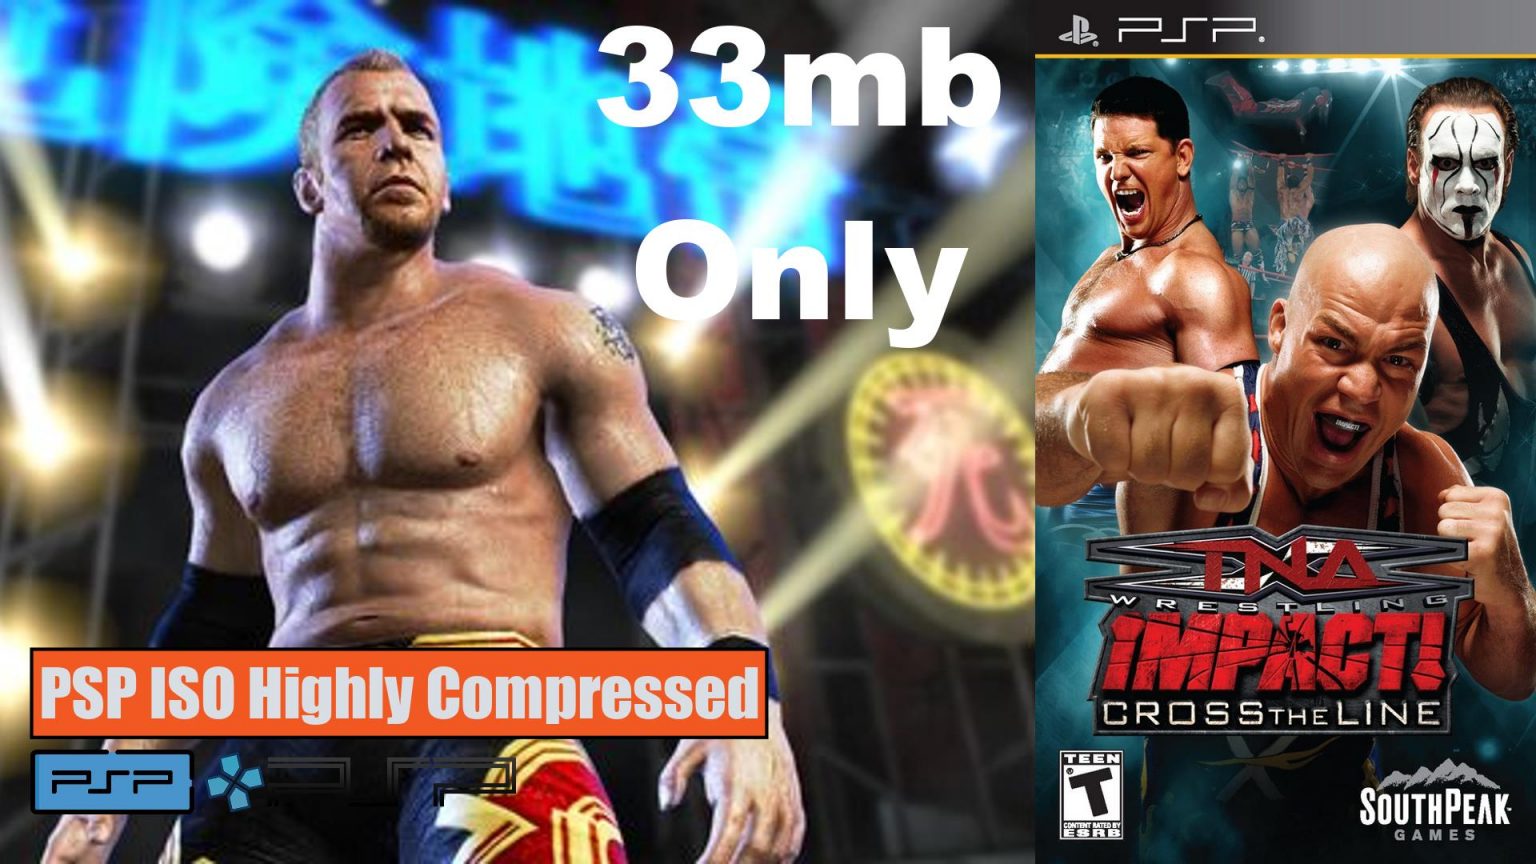 download wwe 13 highly compressed wii iso